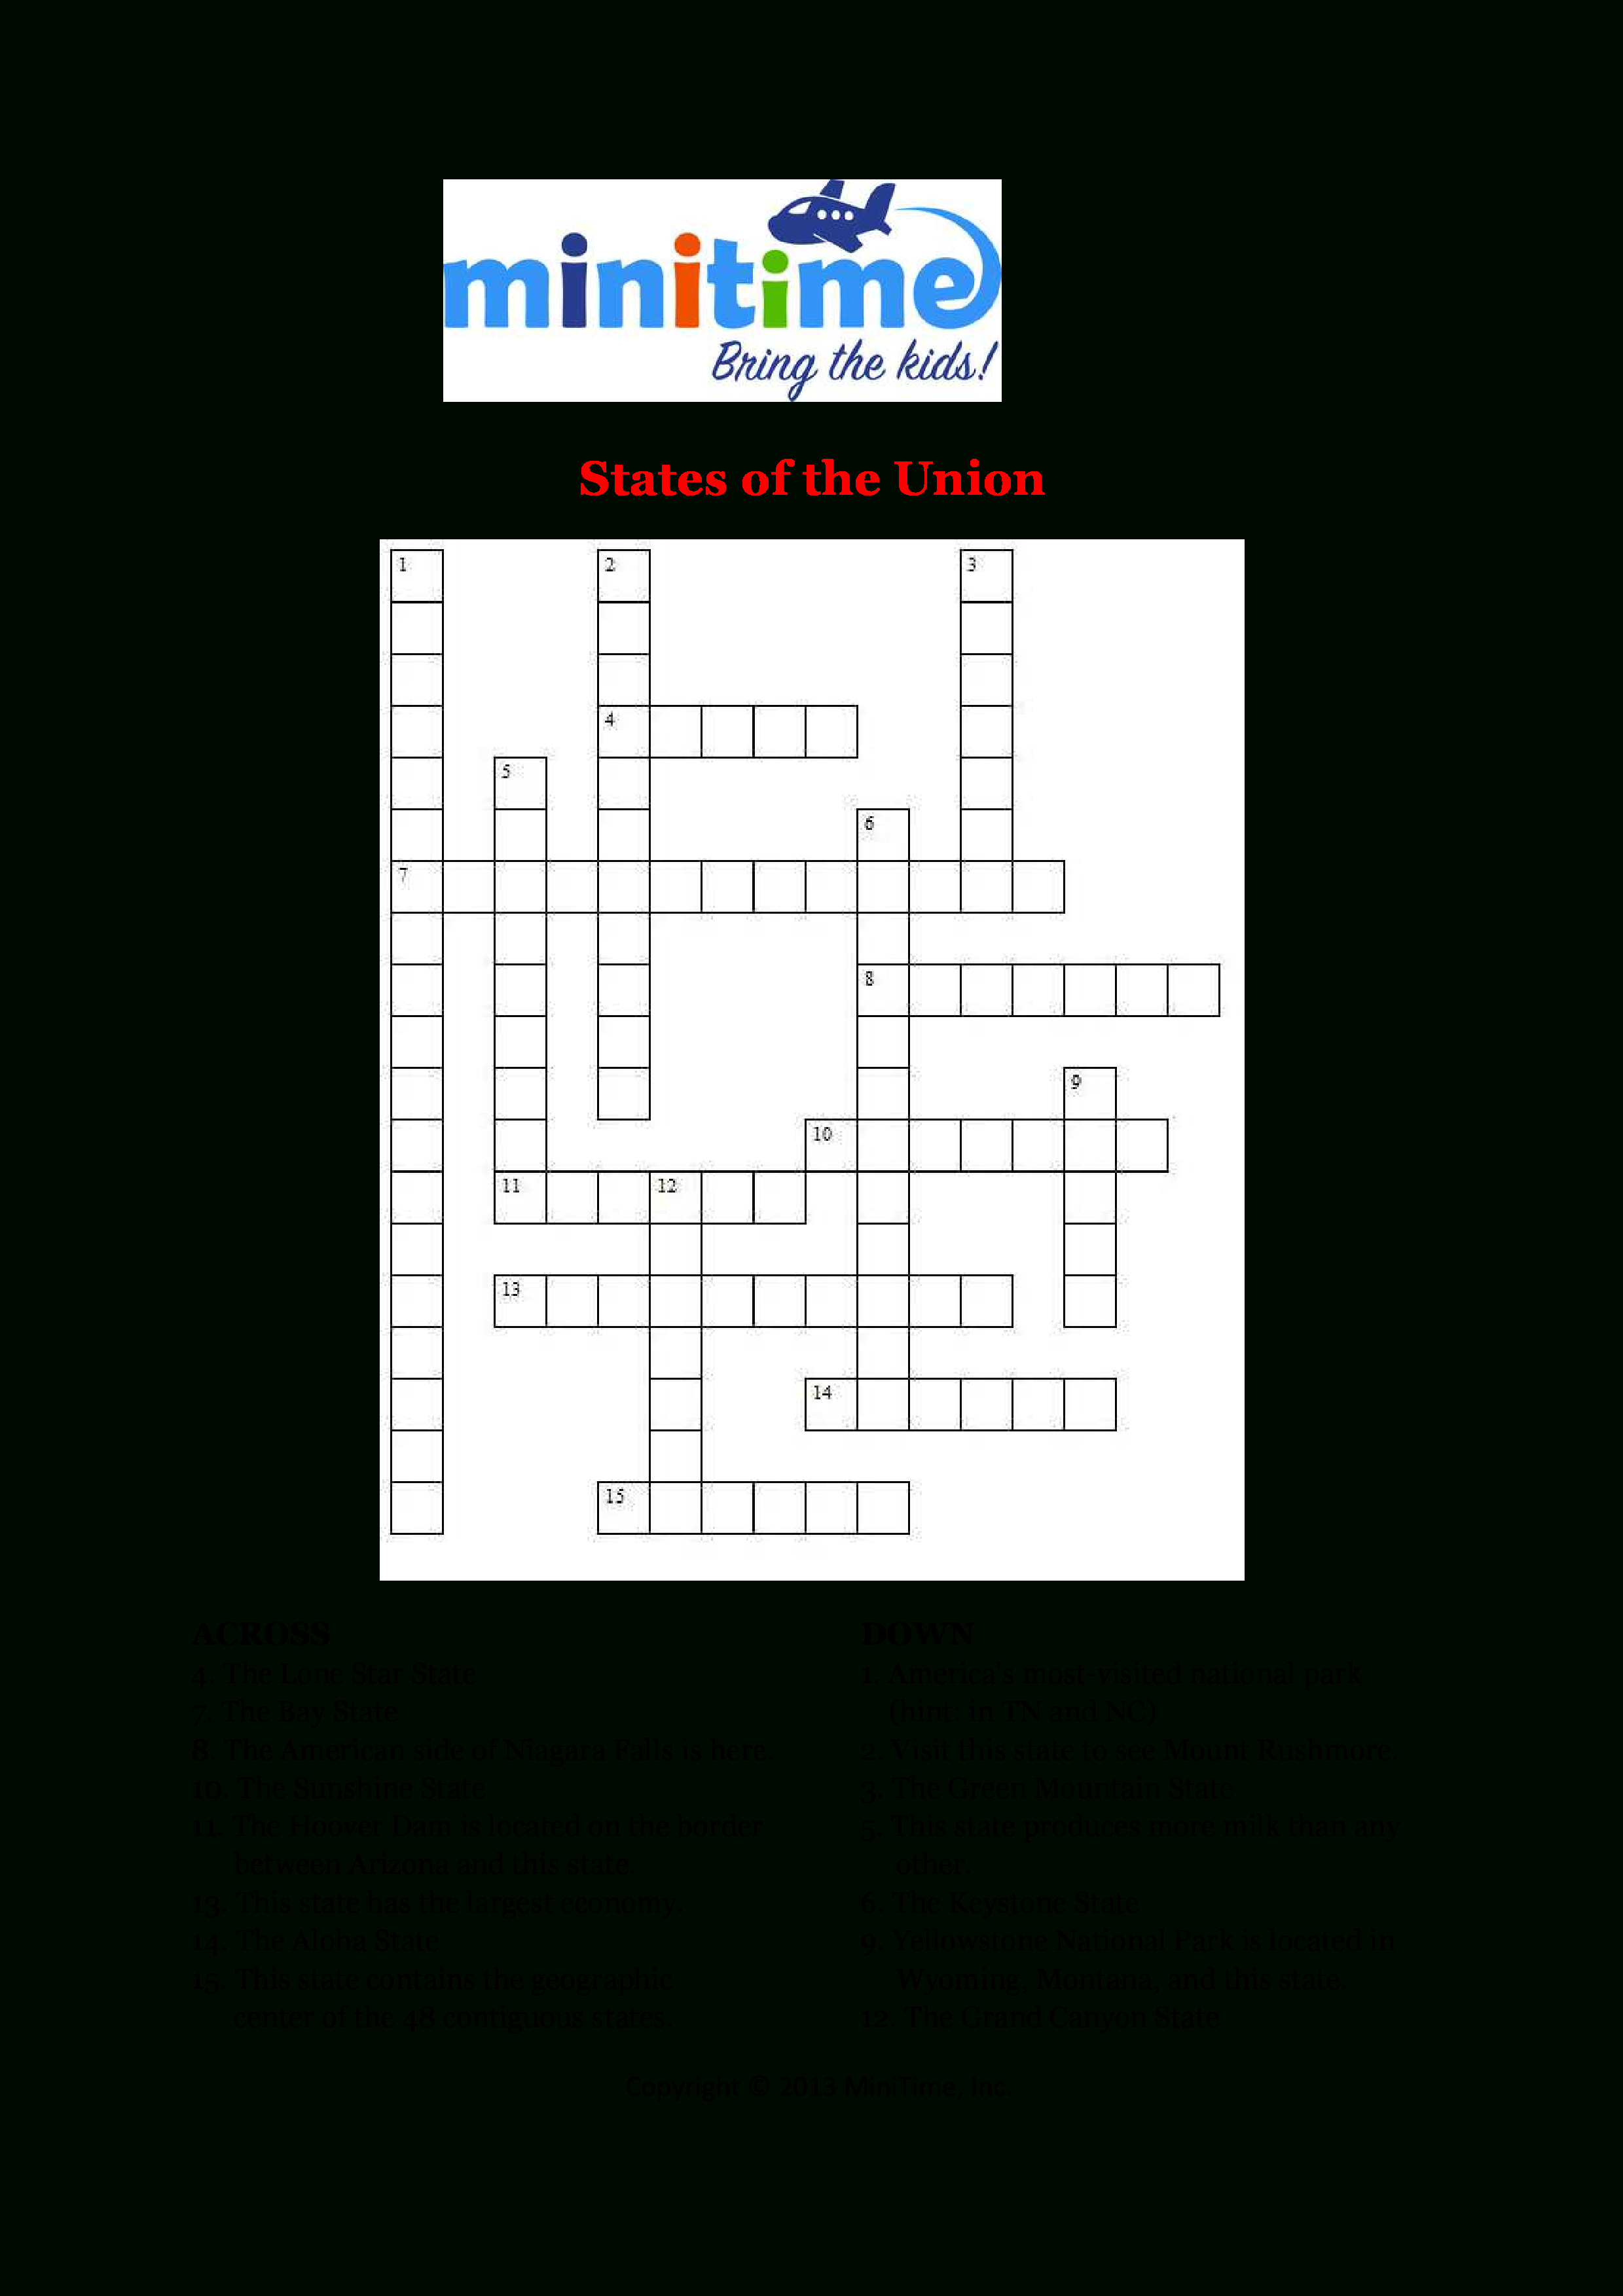 Us States Fun Facts Crossword Puzzles | Free Printable Travel - Printable 50 States Crossword Puzzles